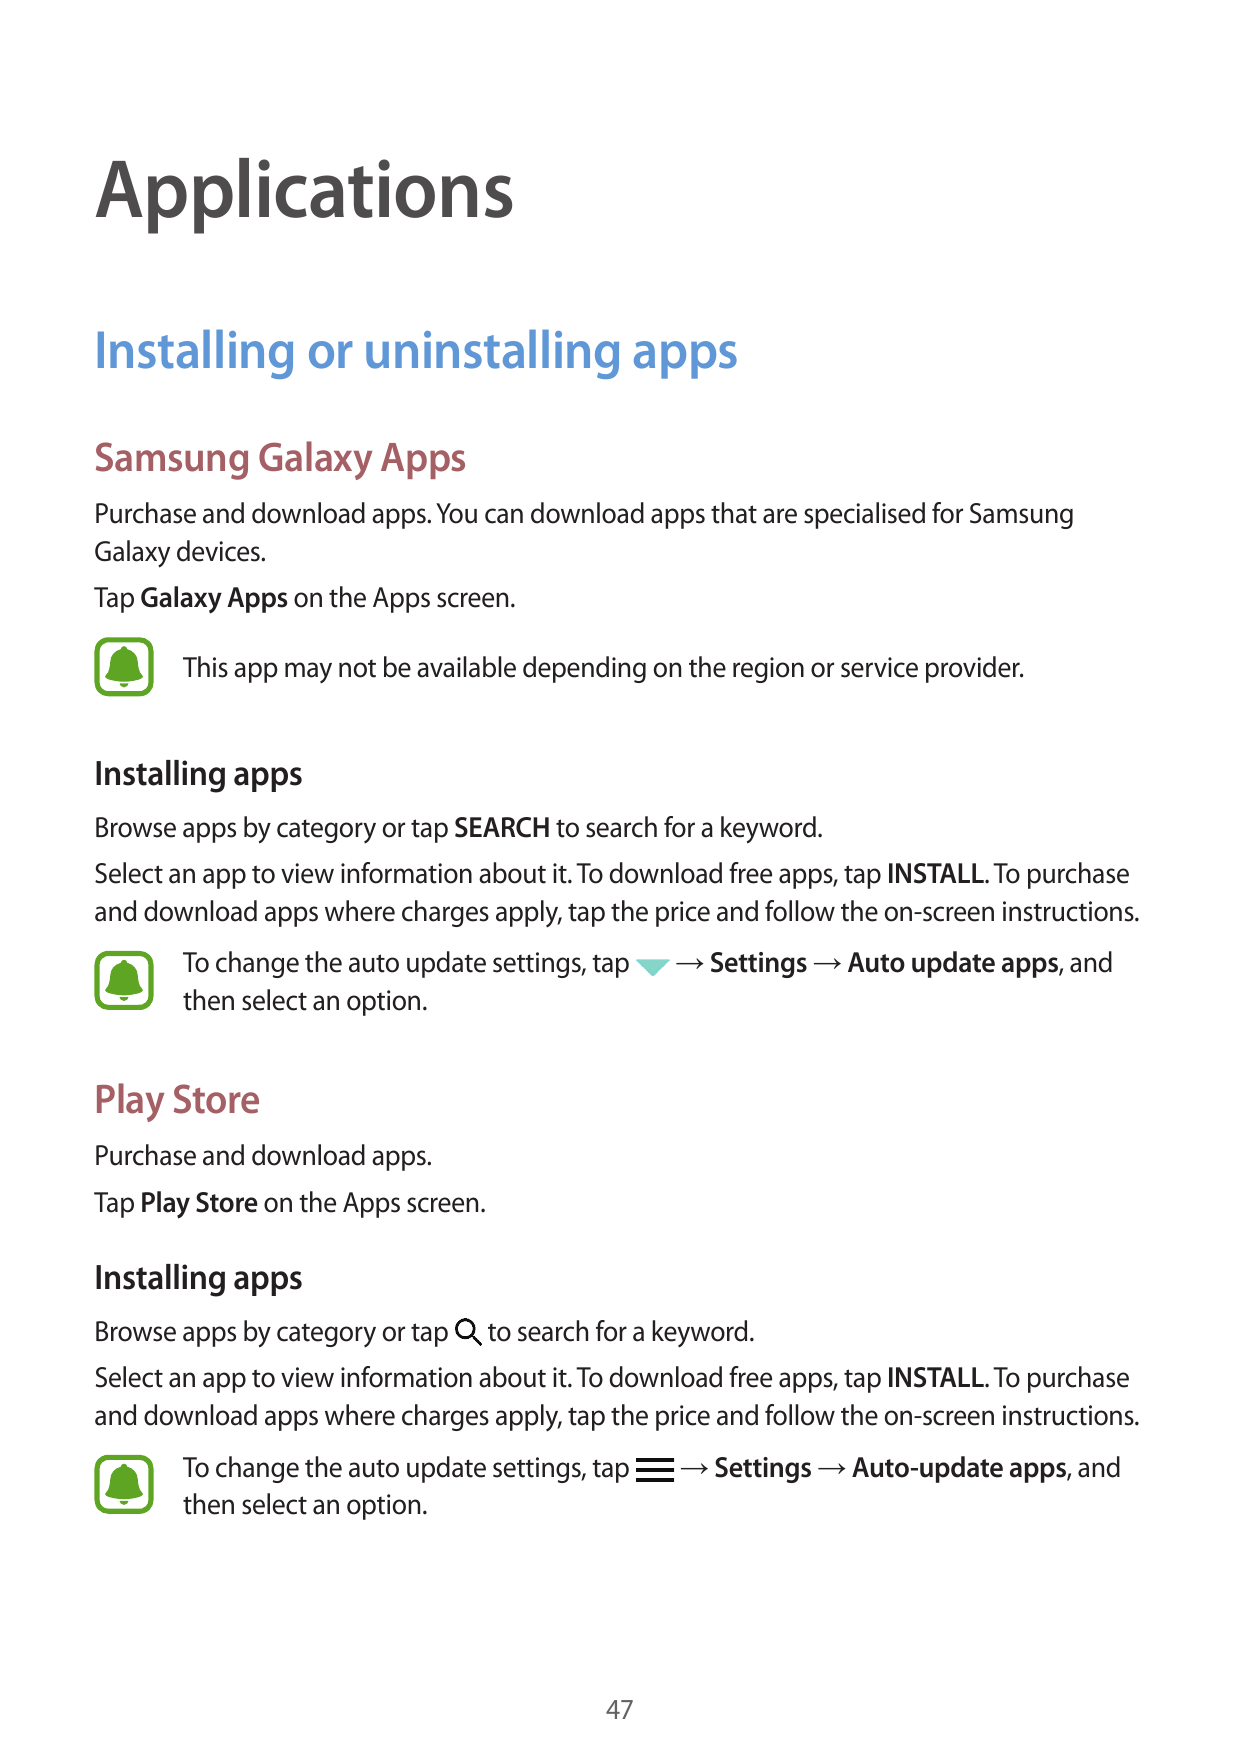 ApplicationsInstalling or uninstalling appsSamsung Galaxy AppsPurchase and download apps. You can download apps that are special